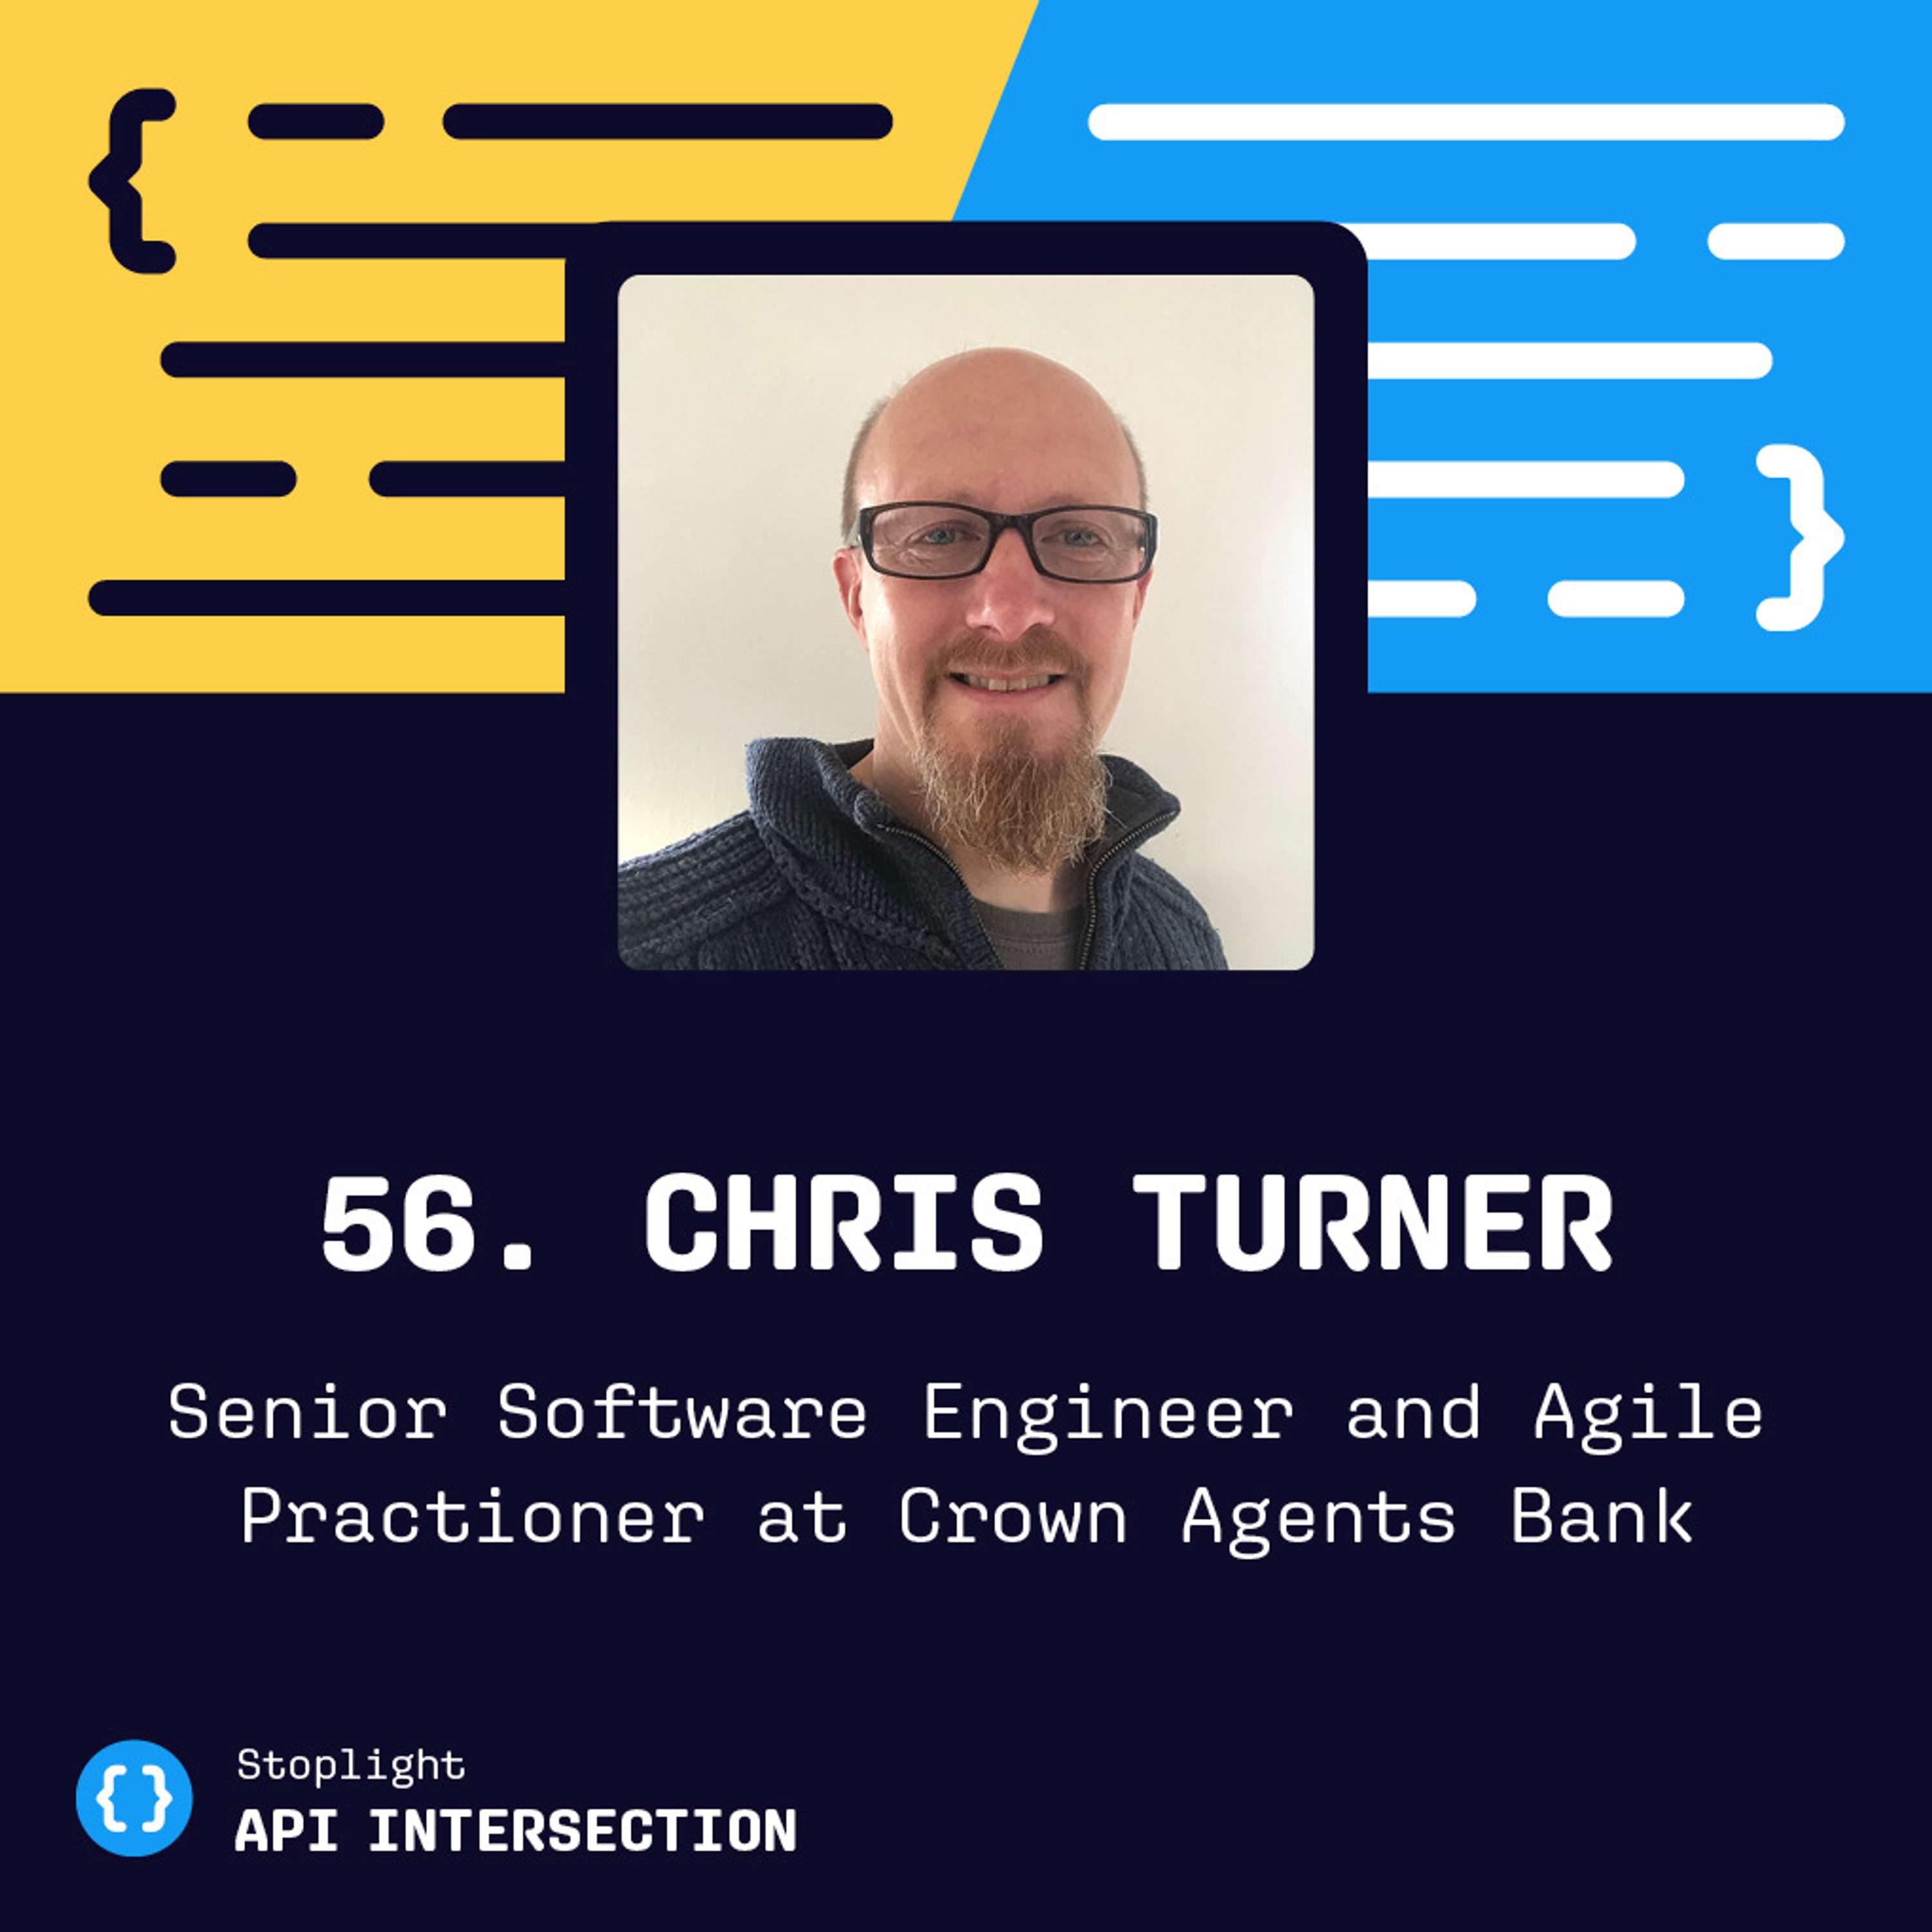 What Challenges Do We Face When Integrating & Standardizing APIs? feat. Chris Turner from Segovia Technology